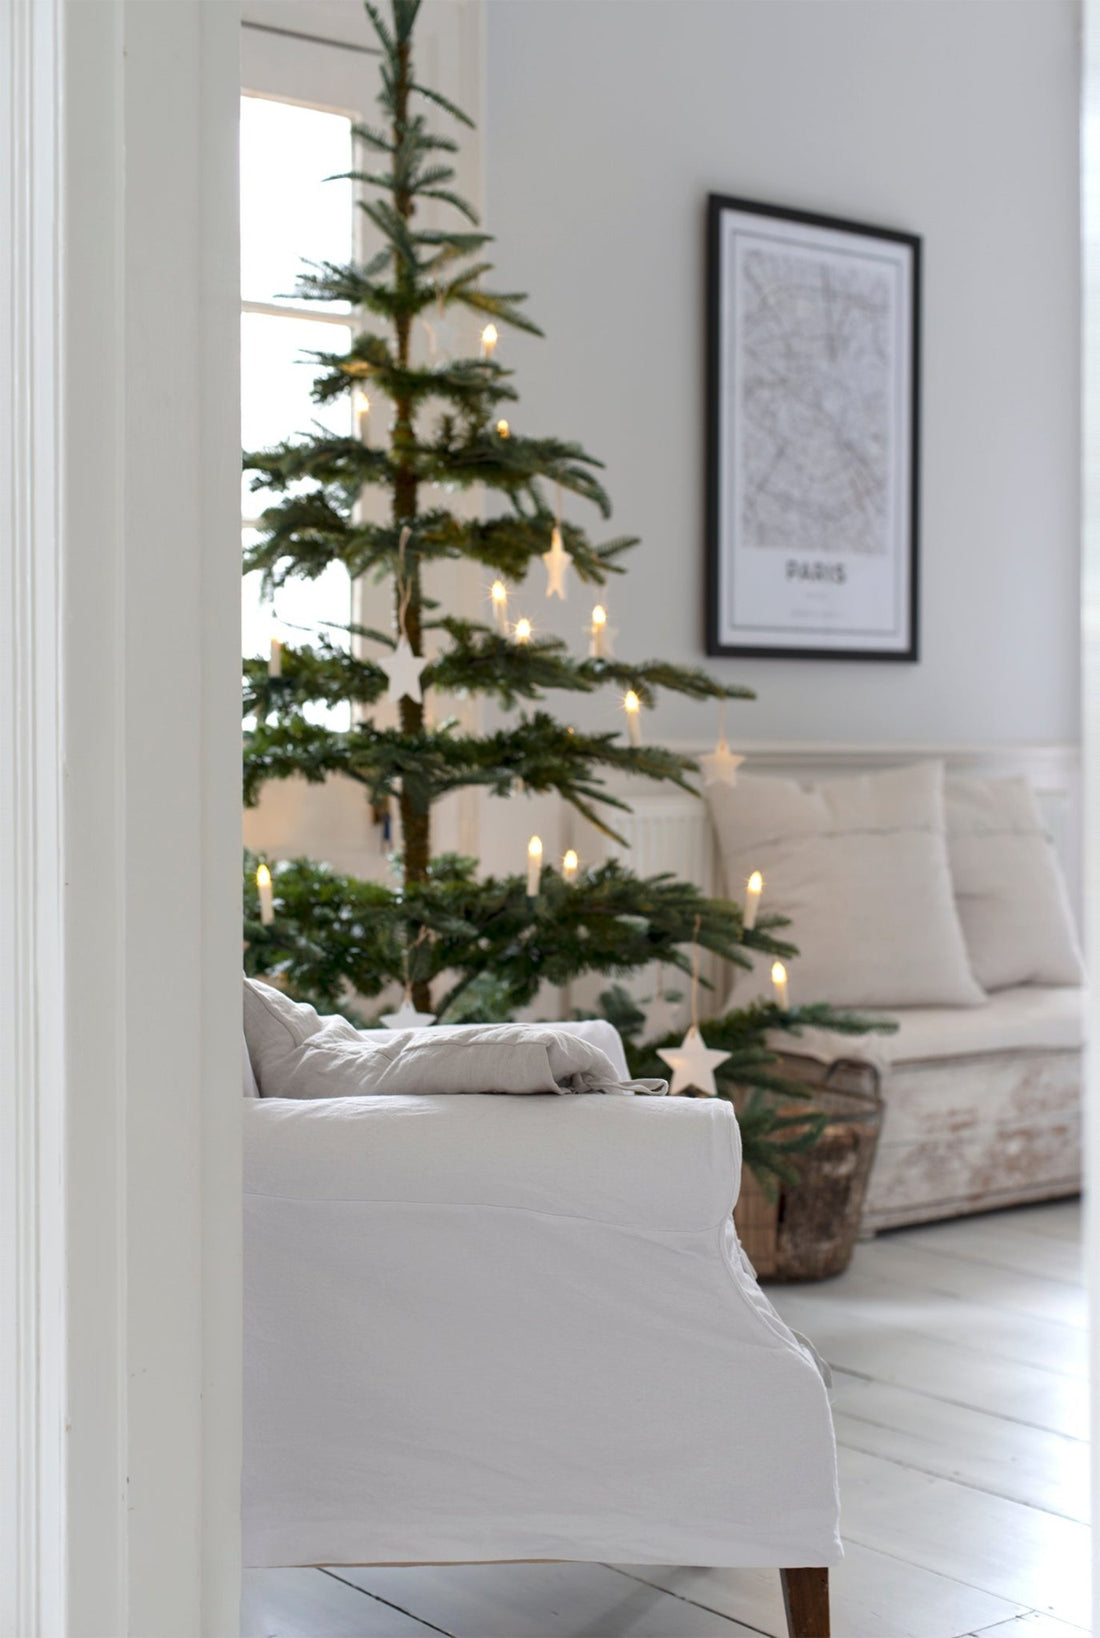 Keeping it simple but elegant this Christmas - White & Faded